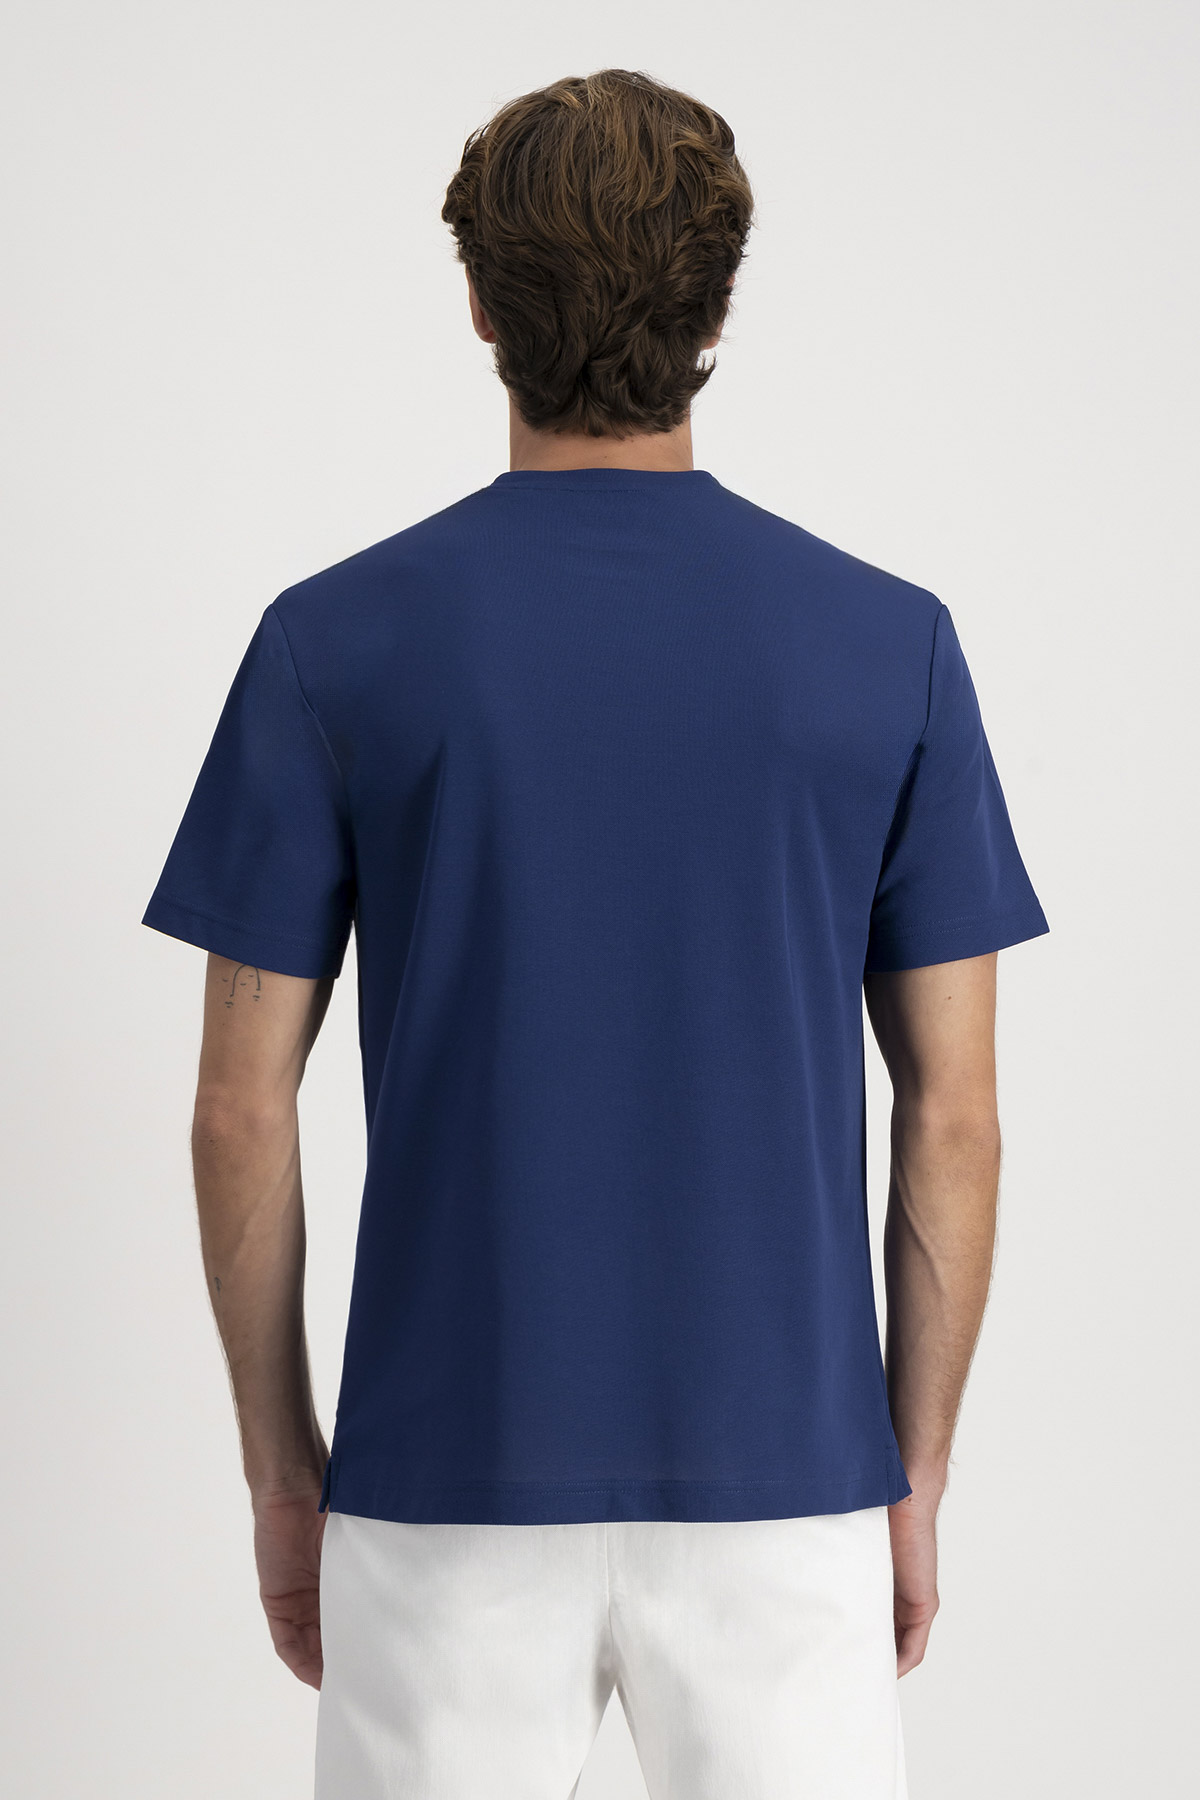 Playera EASY CARE TECHNOLOGY Roberts Color Azul Marino Contemporary Fit